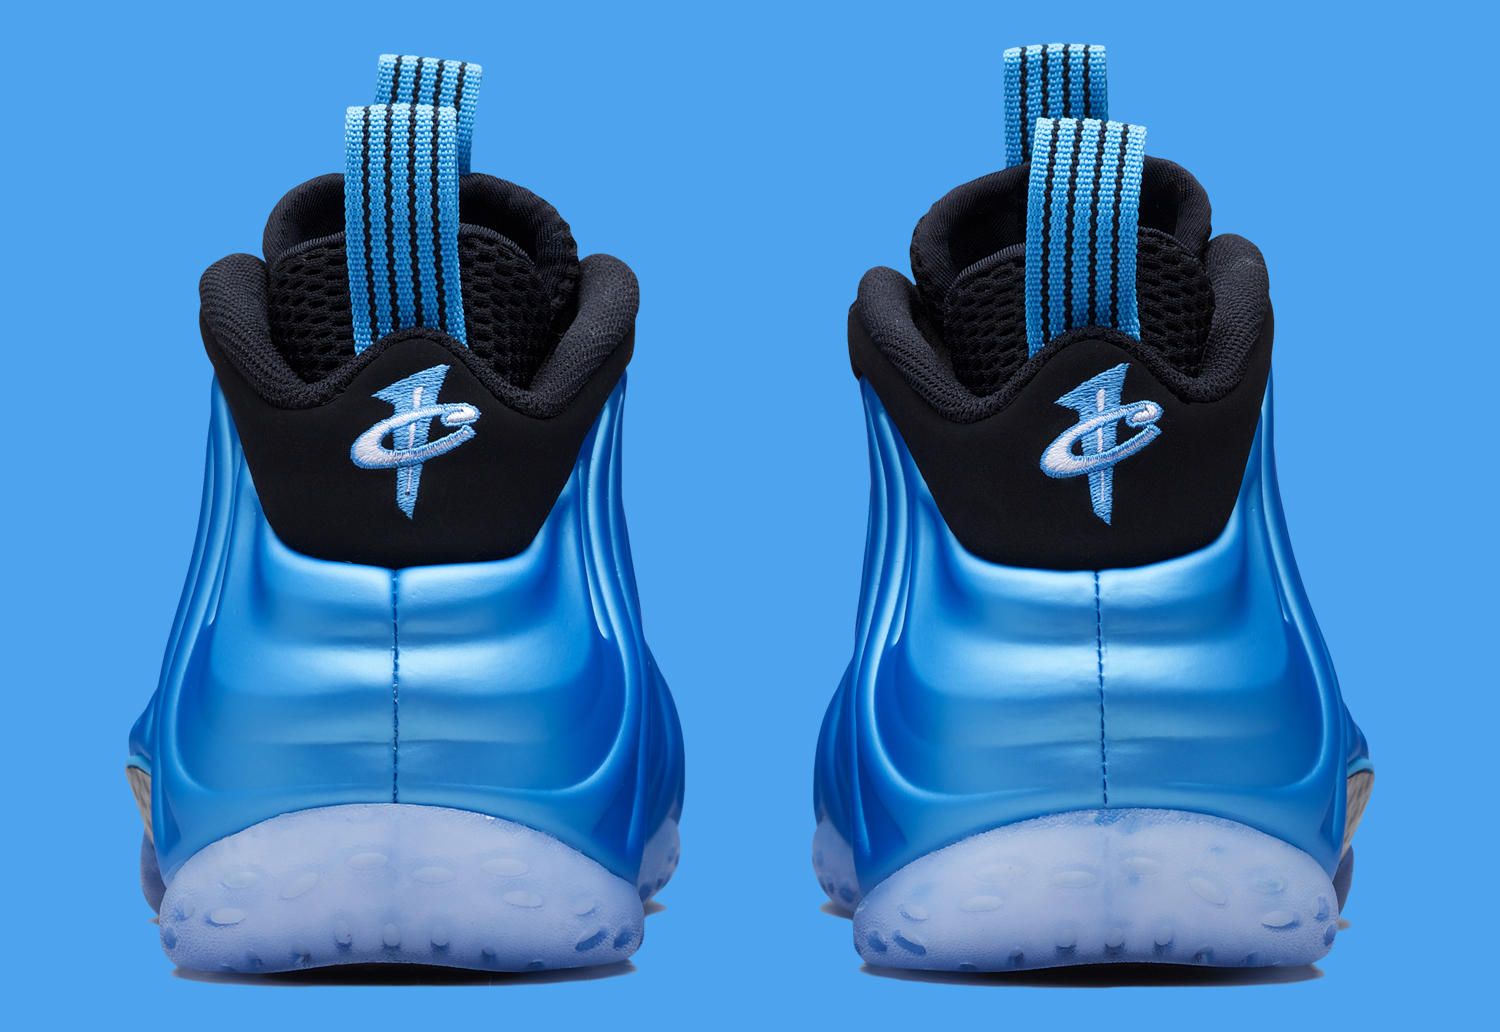 Nike Air Foamposite One University Blue - Official Images - Air 23 ...